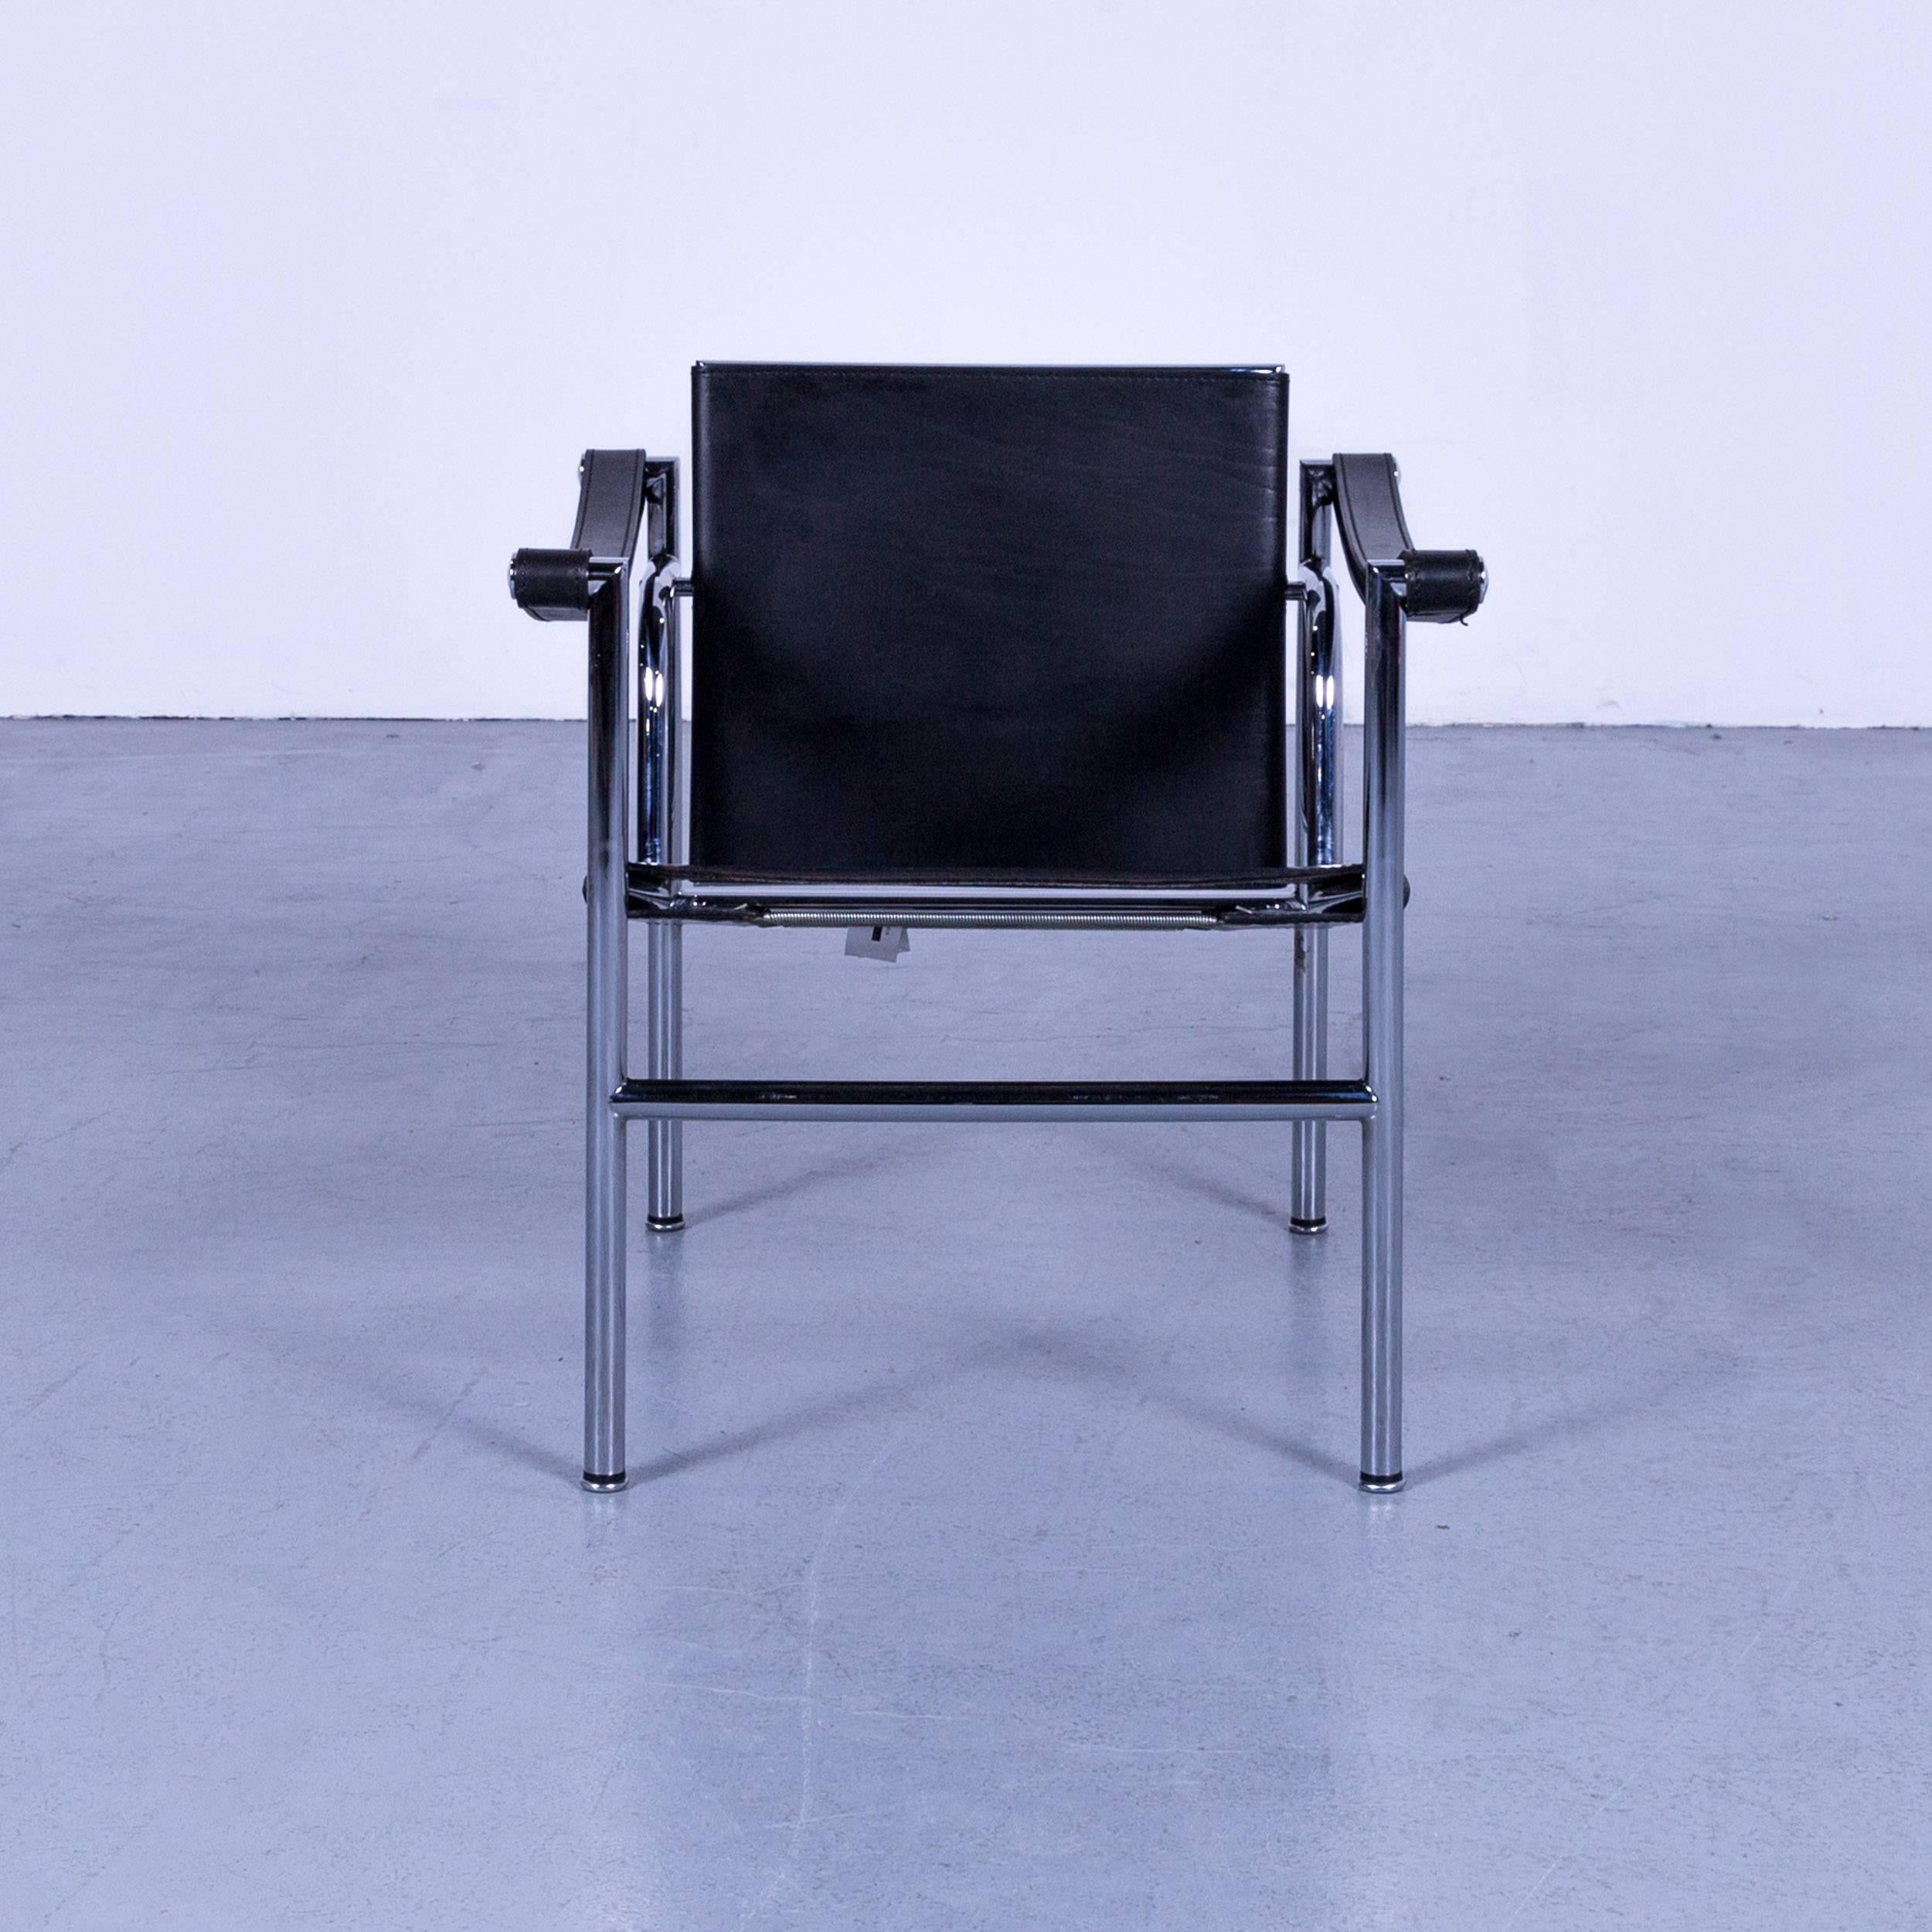 Cassina Le Corbusier LC 1 by Le Corbusier, Jeanneret, Perriand. Sling chair with black leather and polished trivalent chrome-plated (CR3) or semigloss black enamel steel frame. Classic Chair, Bauhaus era.
 